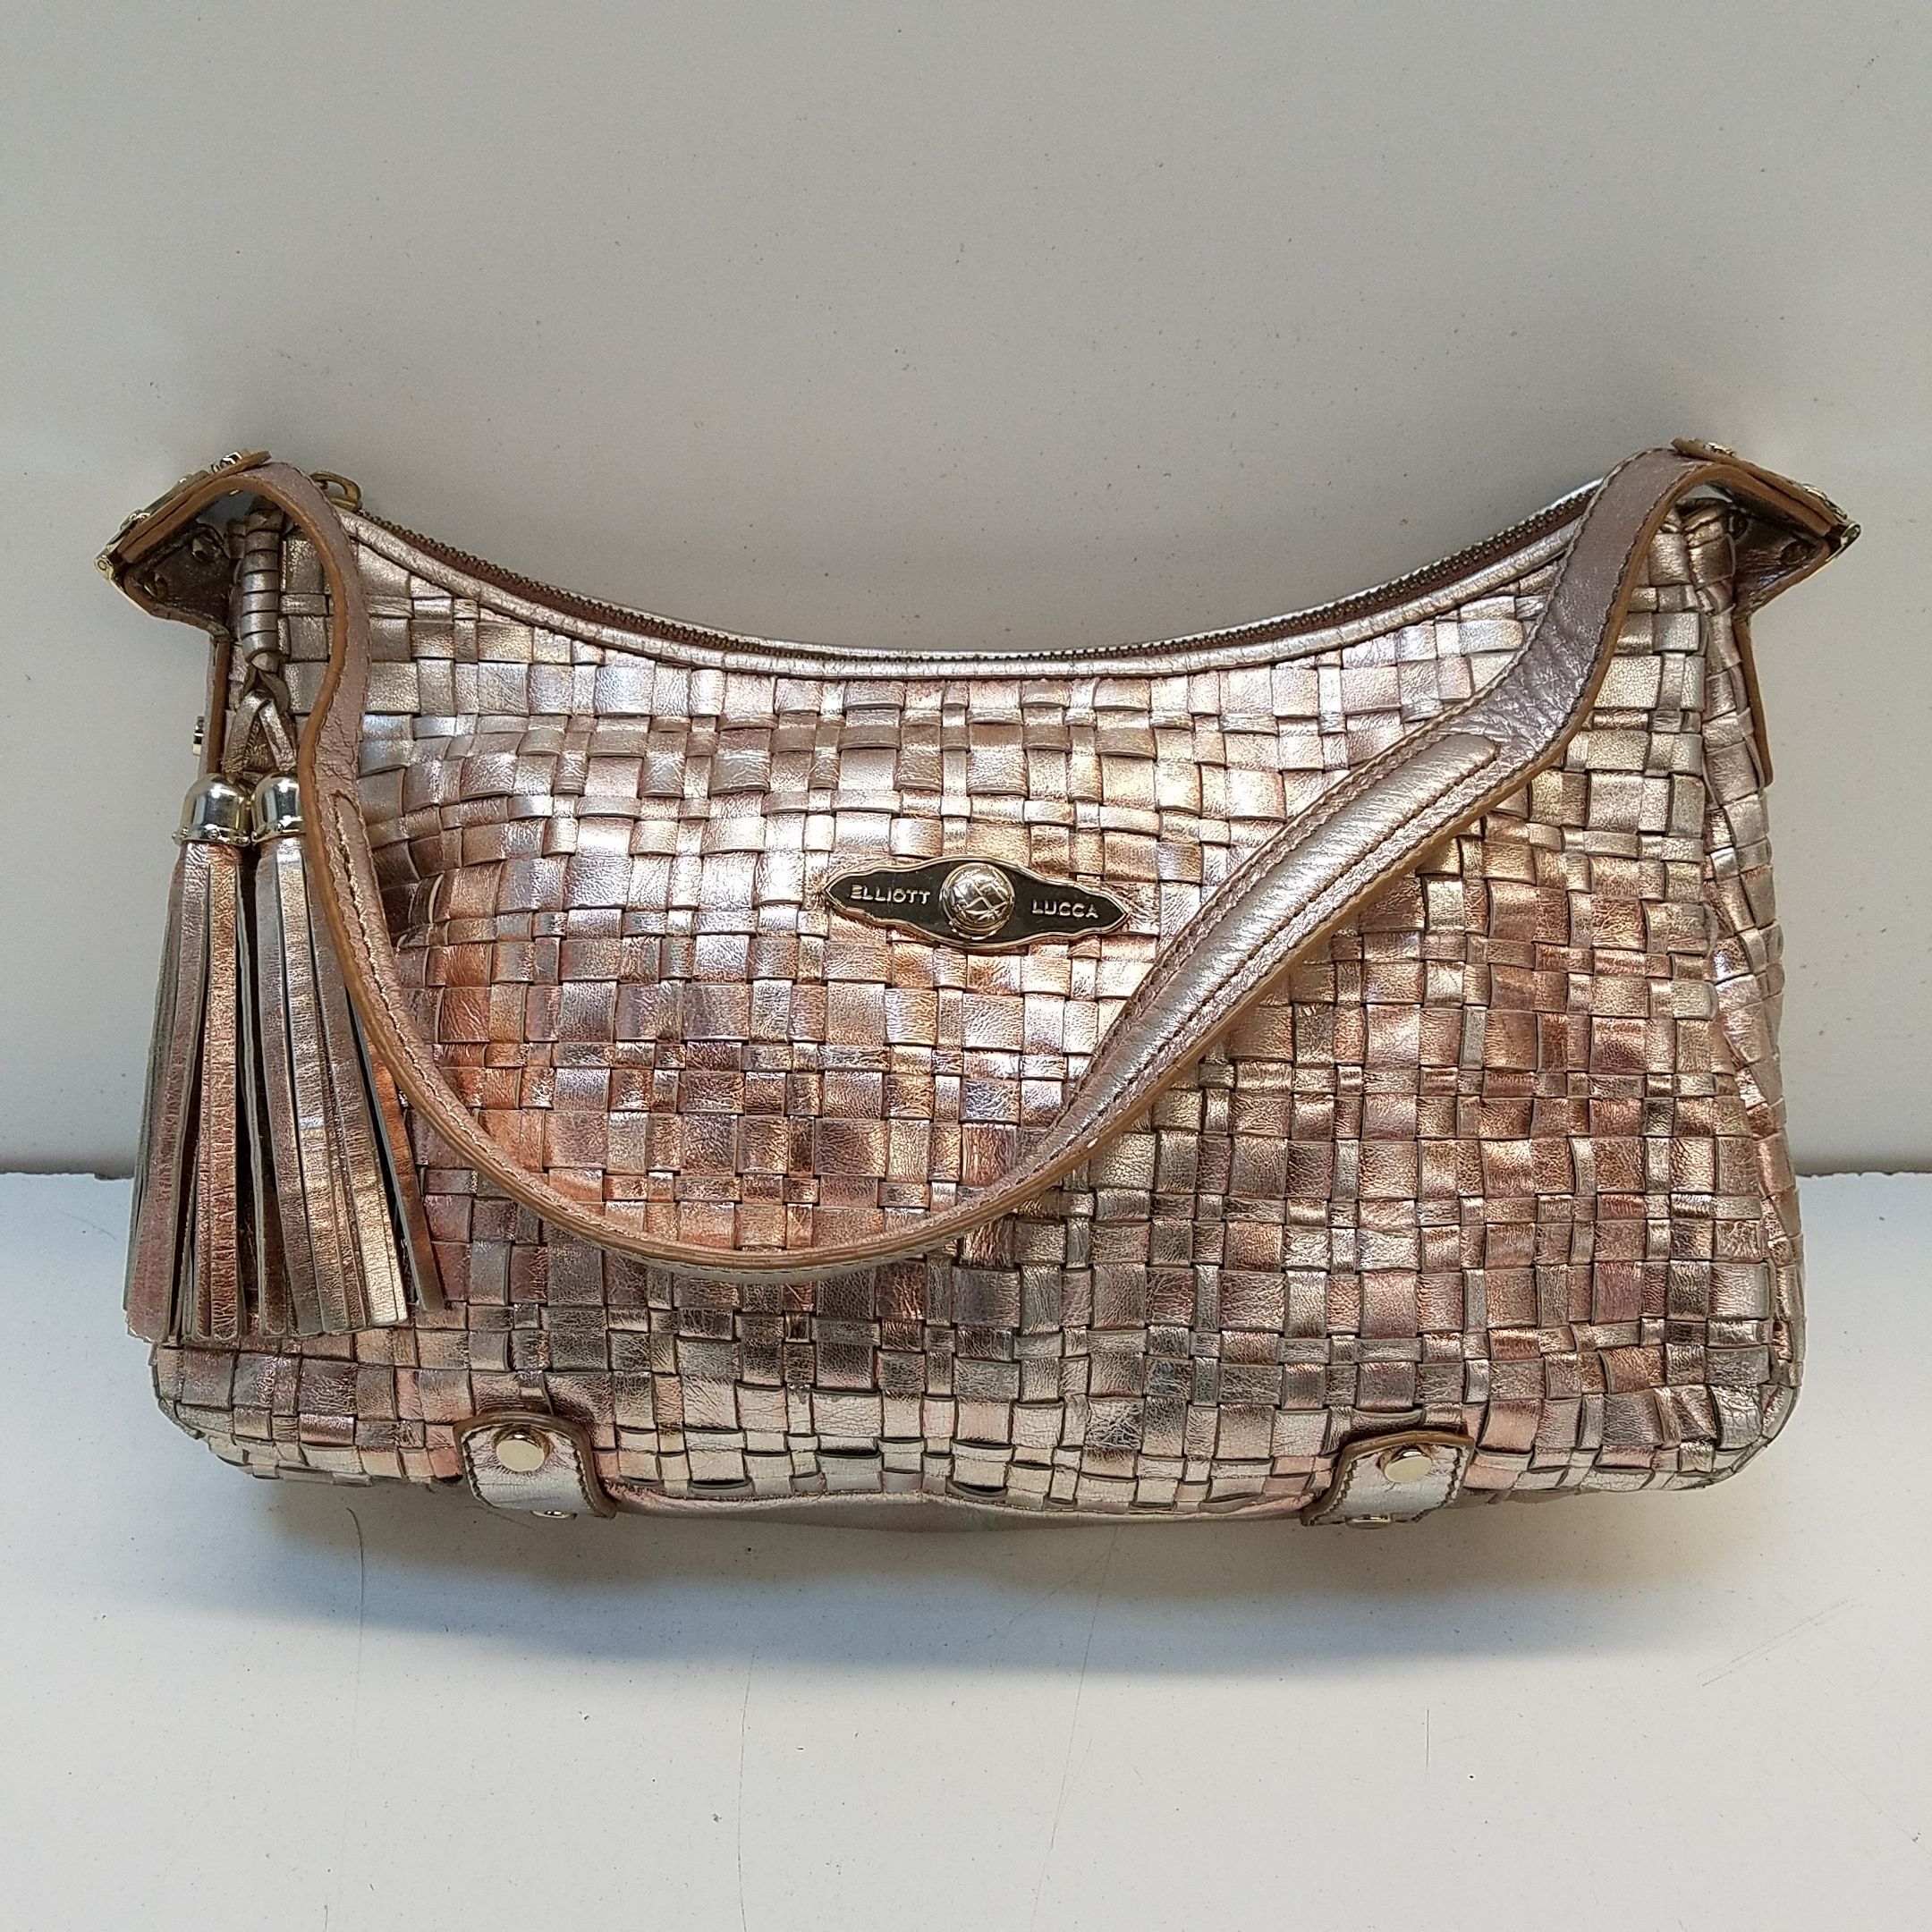 handbags - Elliott Lucca, Guess, Claudia Firenze see all pictures - general  for sale - by owner - craigslist